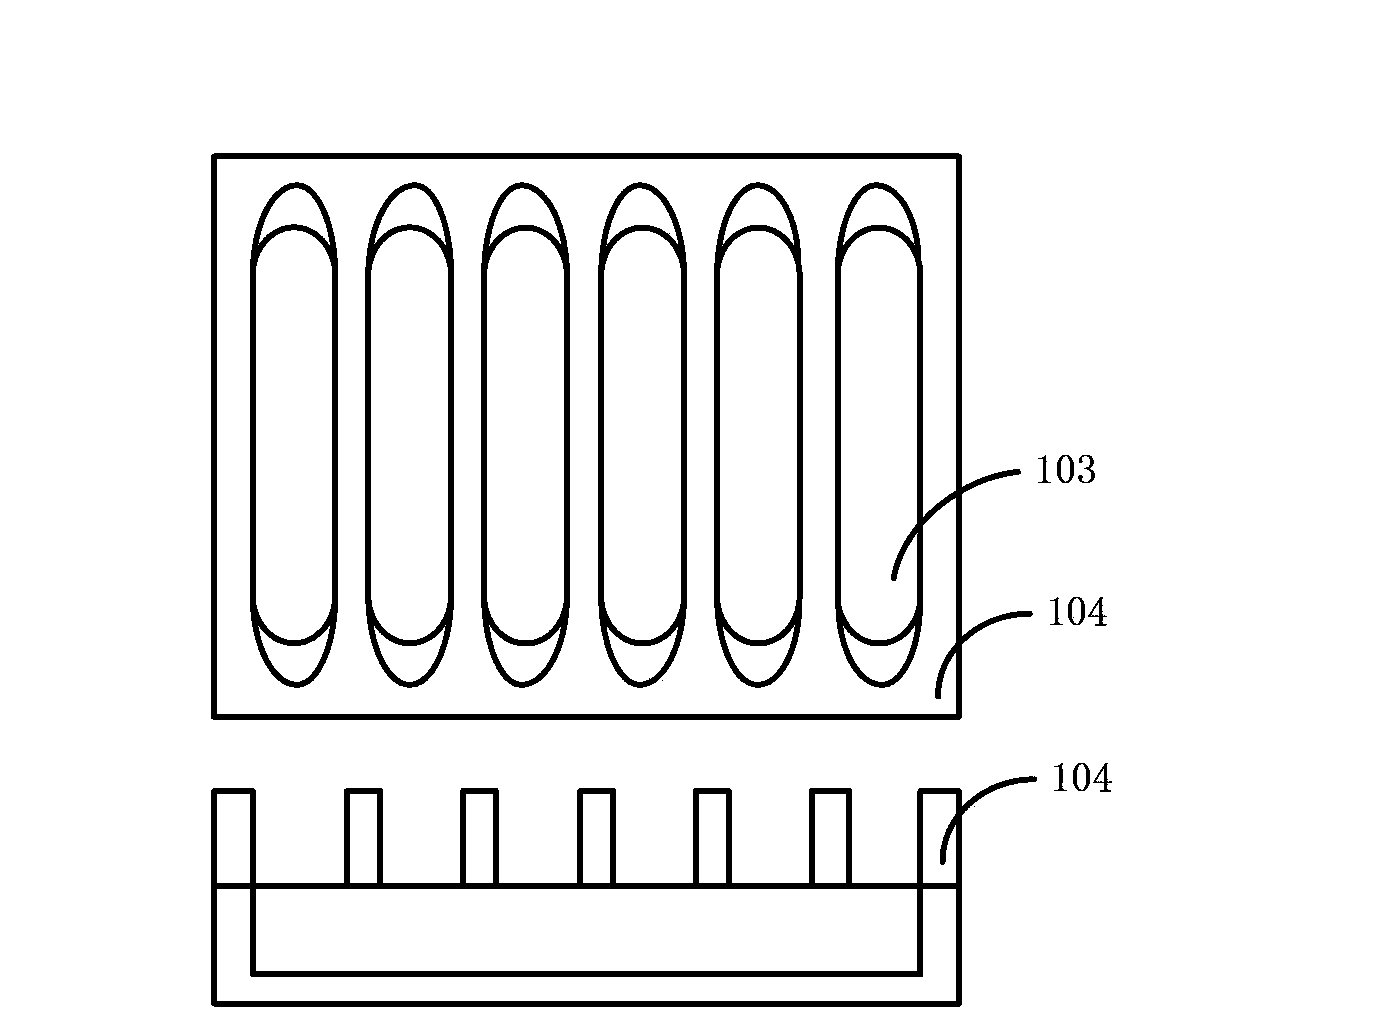 Semiconductor device manufacturing method based on self-aligned double patterning